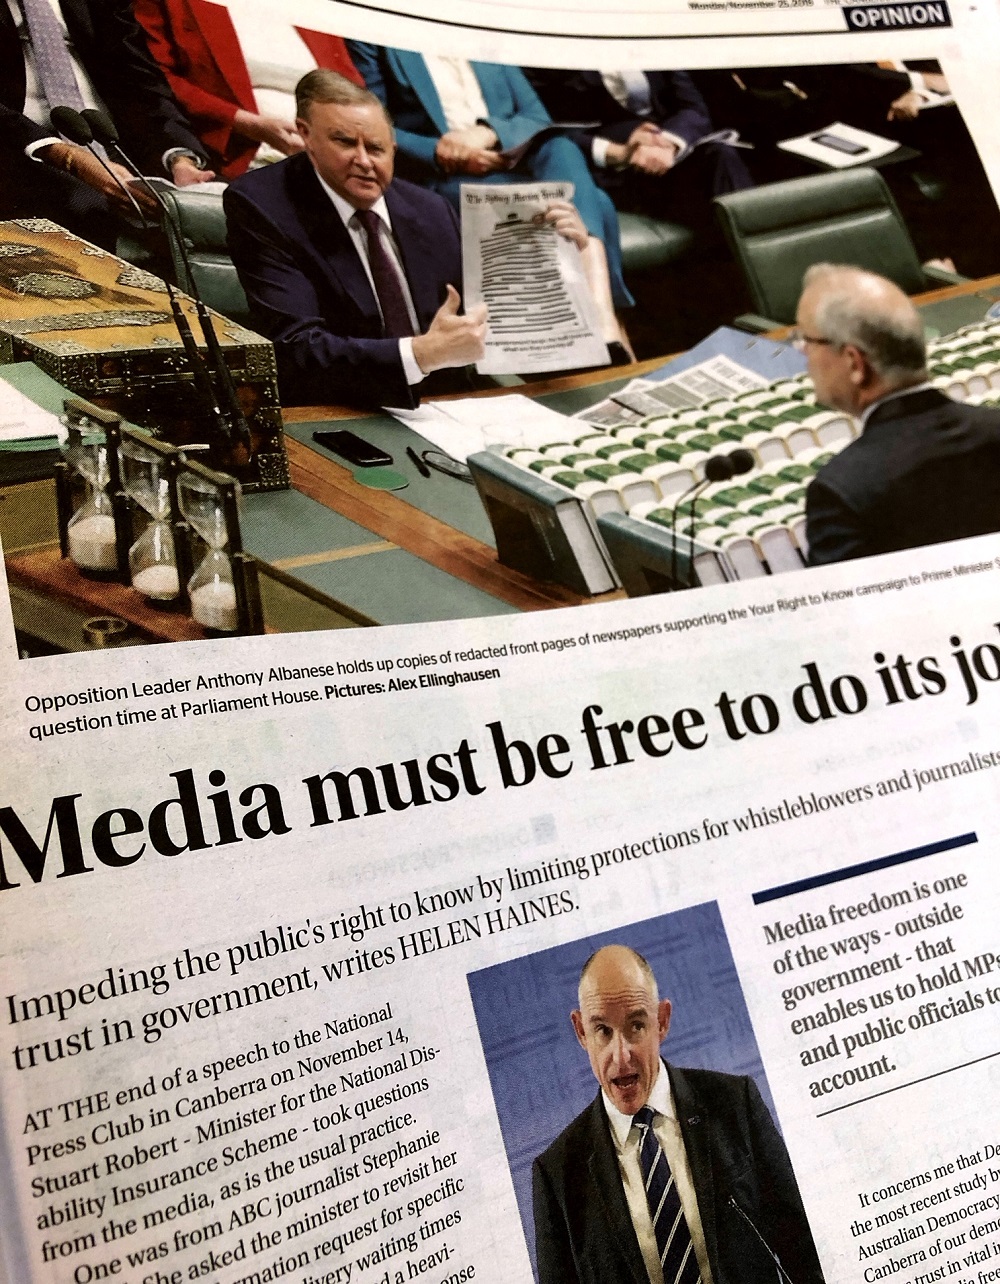 191125 media freedom canberra times front page jk